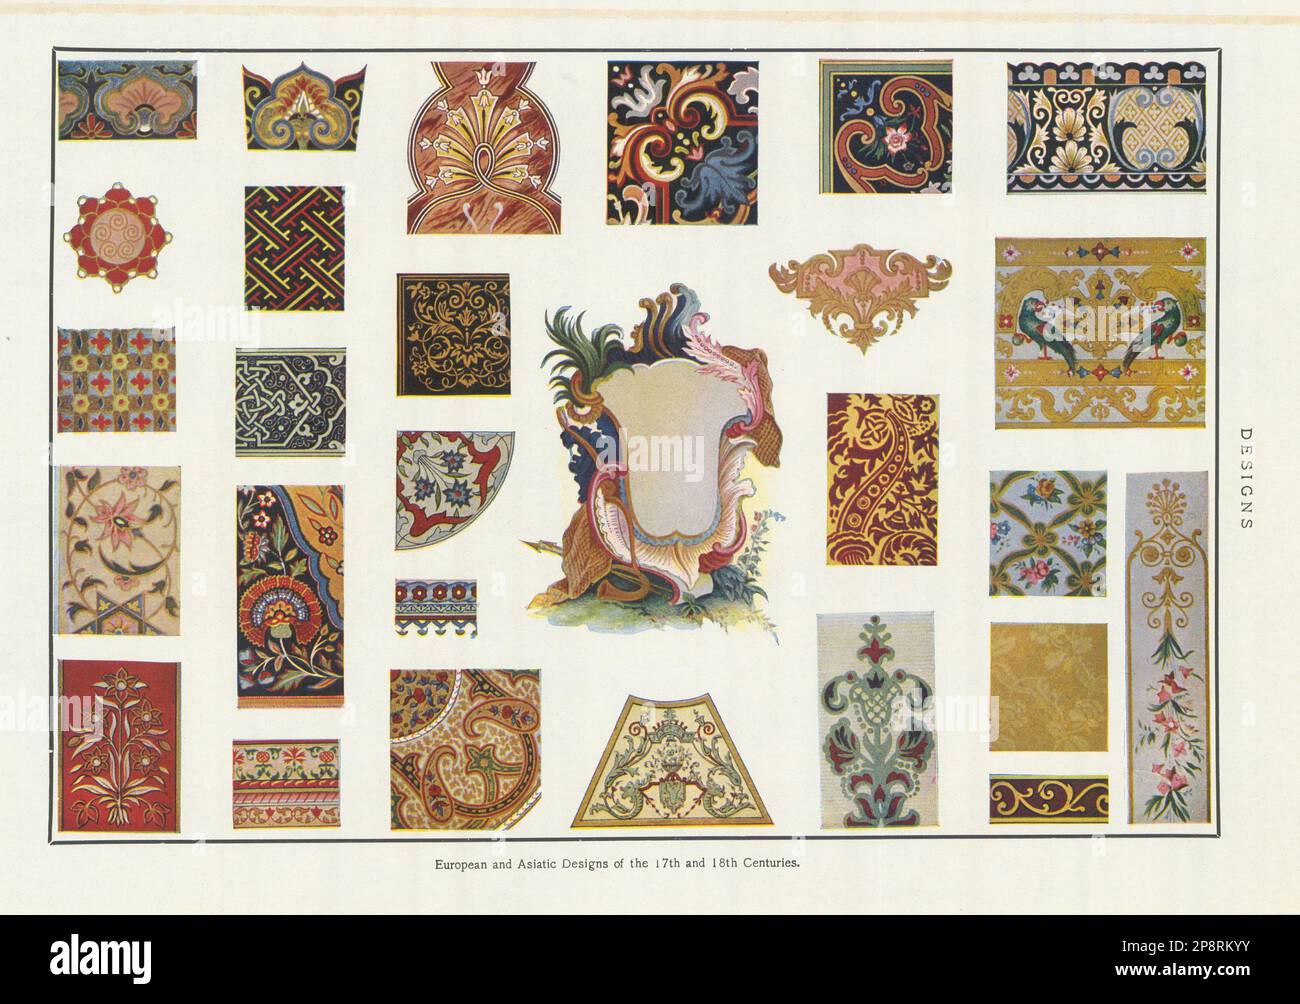 European and Asiatic Designs of the 17th and 18th Centuries, 1907 old print Stock Photo